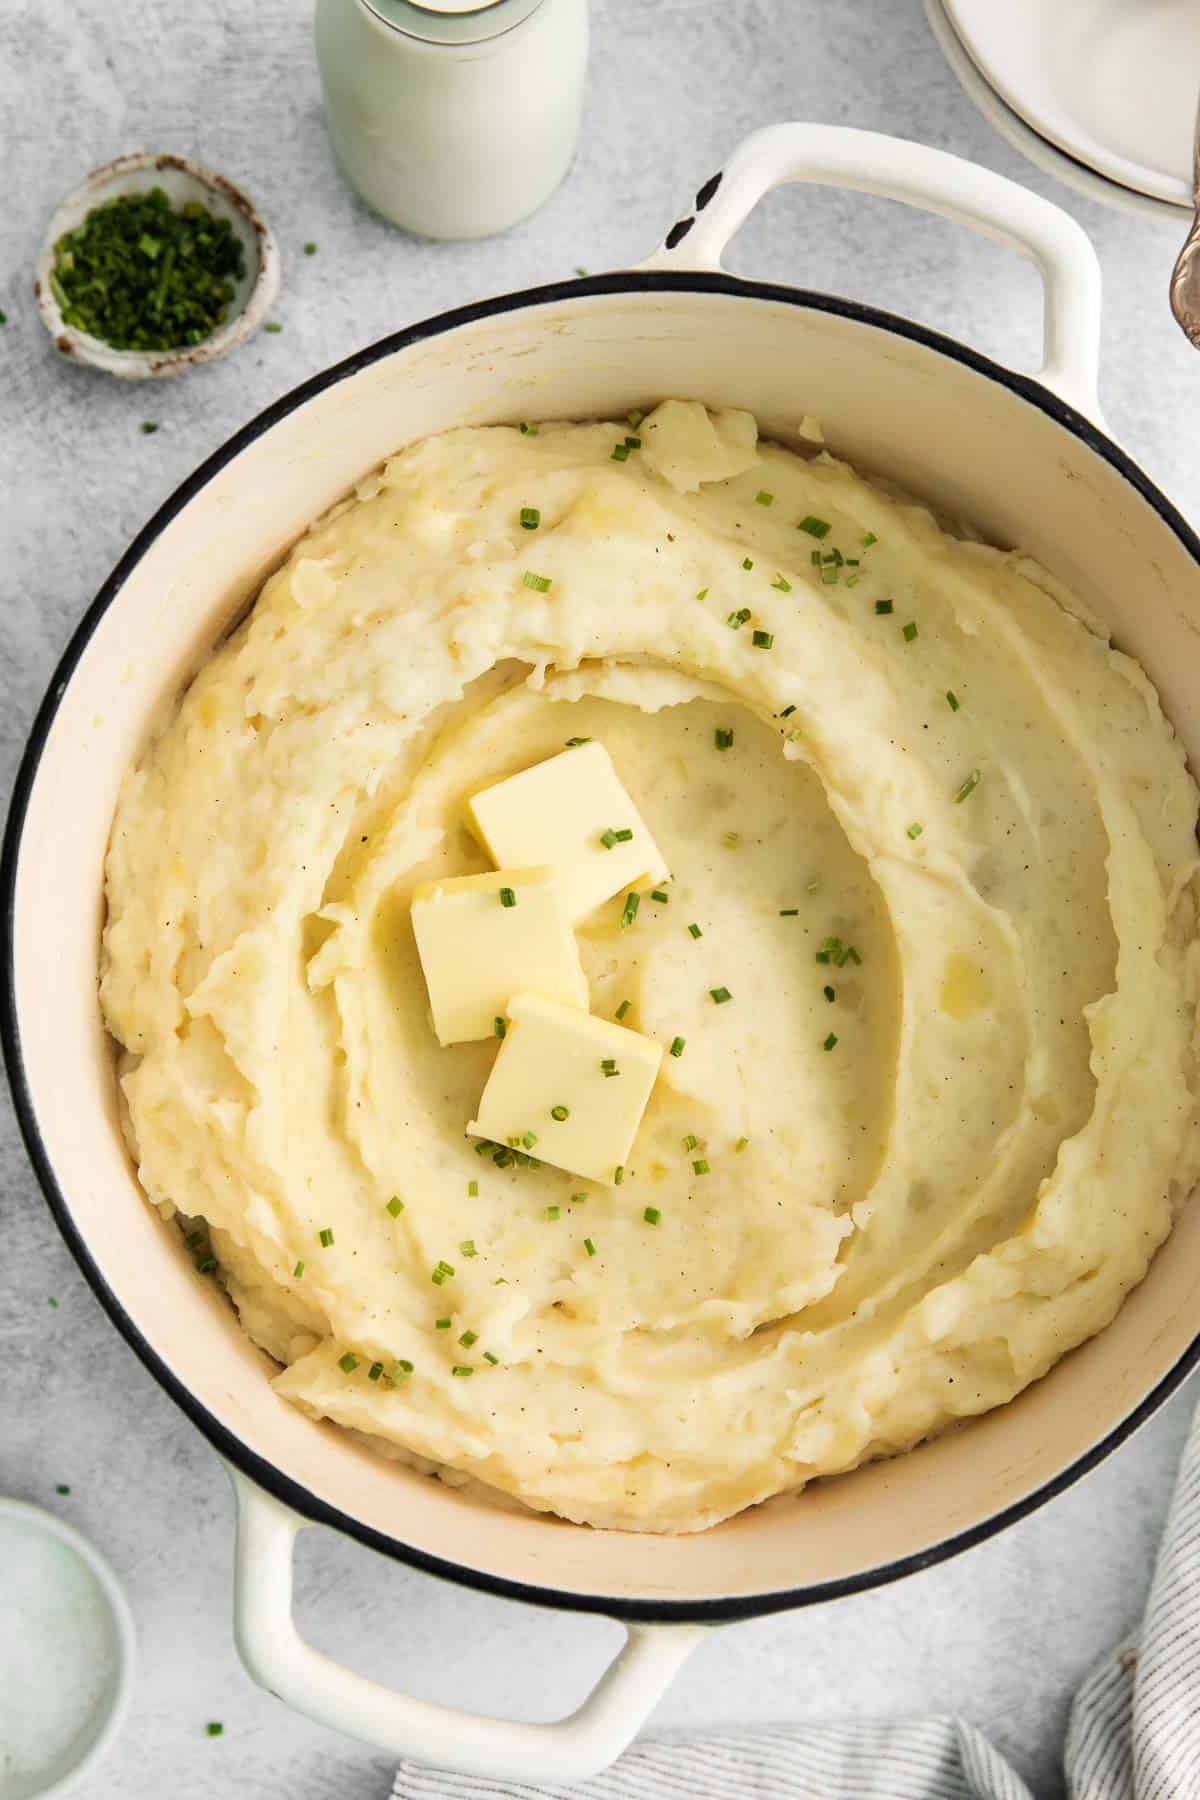 A close-up view of mashed potatoes in a pot